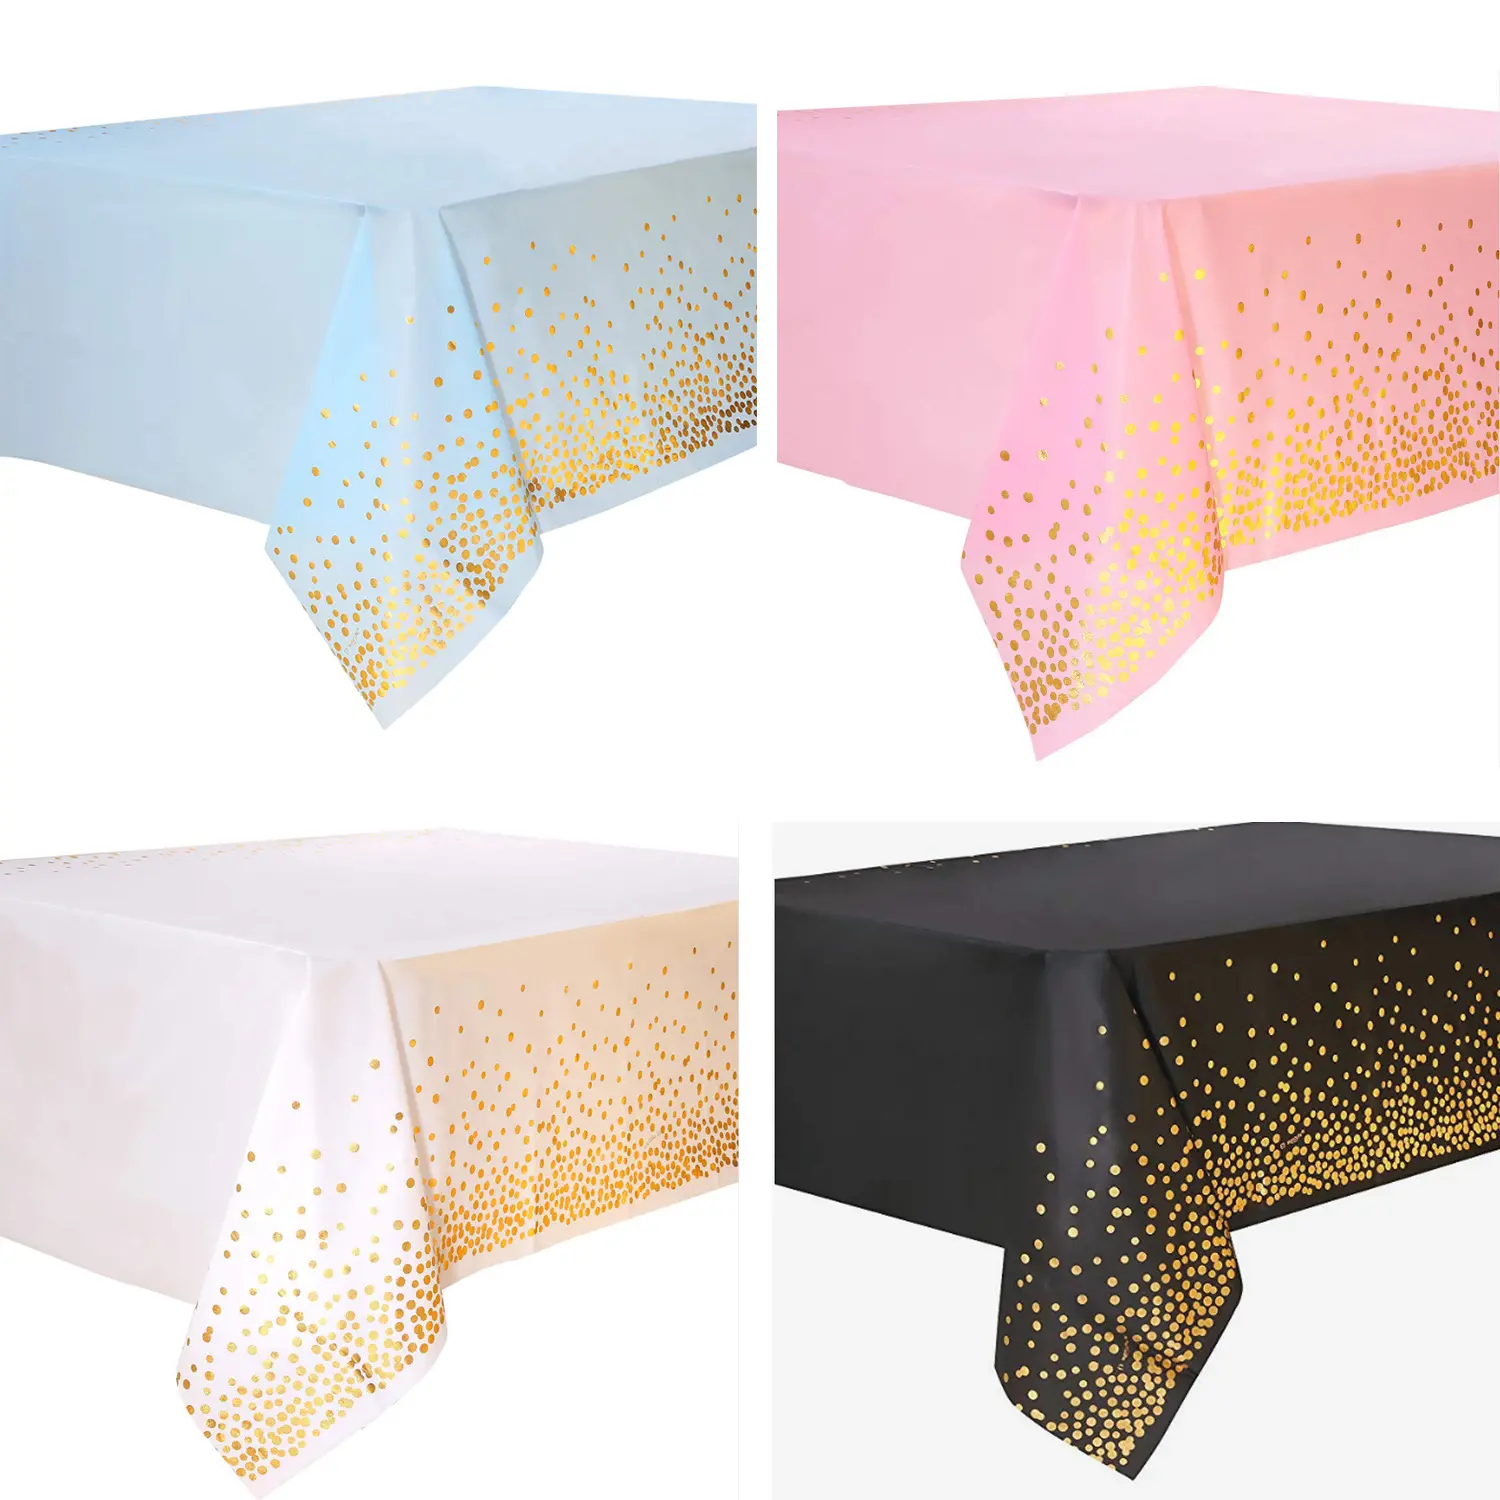 Customized Printed Rectangle Disposable Waterproof and oilproof Birthday Wedding Party Plastic Tablecloths Table Cover